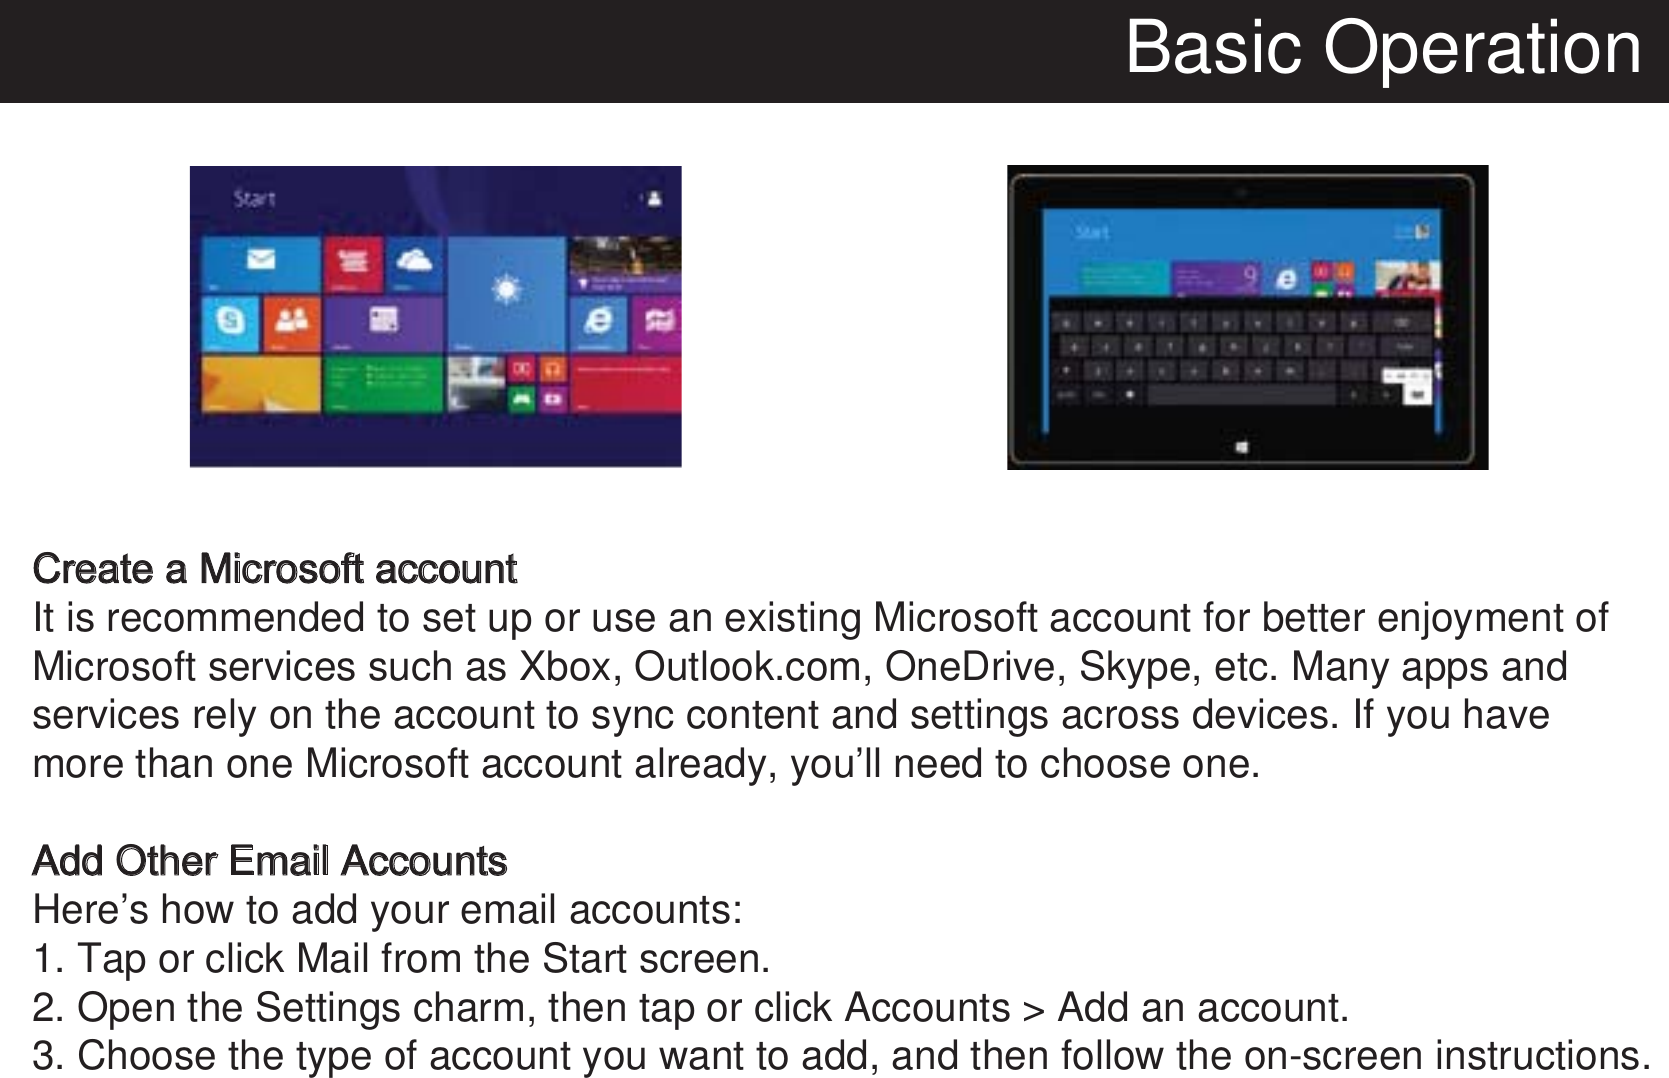 Basic OperationCreate a Microsoft accountIt is recommended to set up or use an existing Microsoft account for better enjoyment of Microsoft services such as Xbox, Outlook.com, OneDrive, Skype, etc. Many apps and services rely on the account to sync content and settings across devices. If you have more than one Microsoft account already, you’ll need to choose one.Add Other Email AccountsHere’s how to add your email accounts:1. Tap or click Mail from the Start screen.2. Open the Settings charm, then tap or click Accounts &gt; Add an account.3. Choose the type of account you want to add, and then follow the on-screen instructions. 